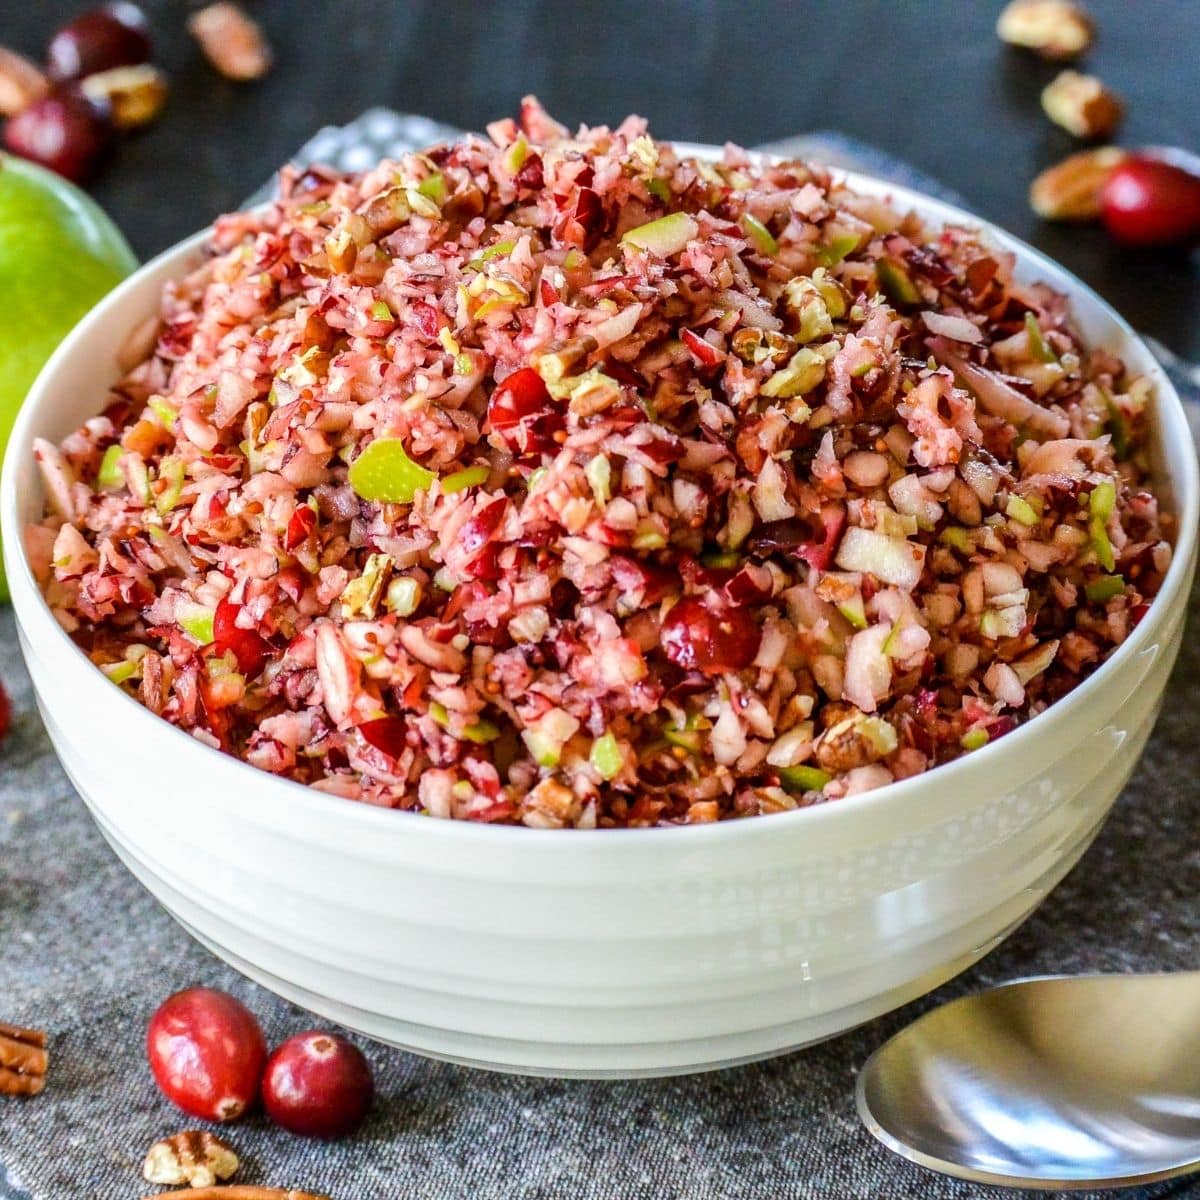 Bowl of relish surrounded by raw cranberries, a green apple, and pecans.